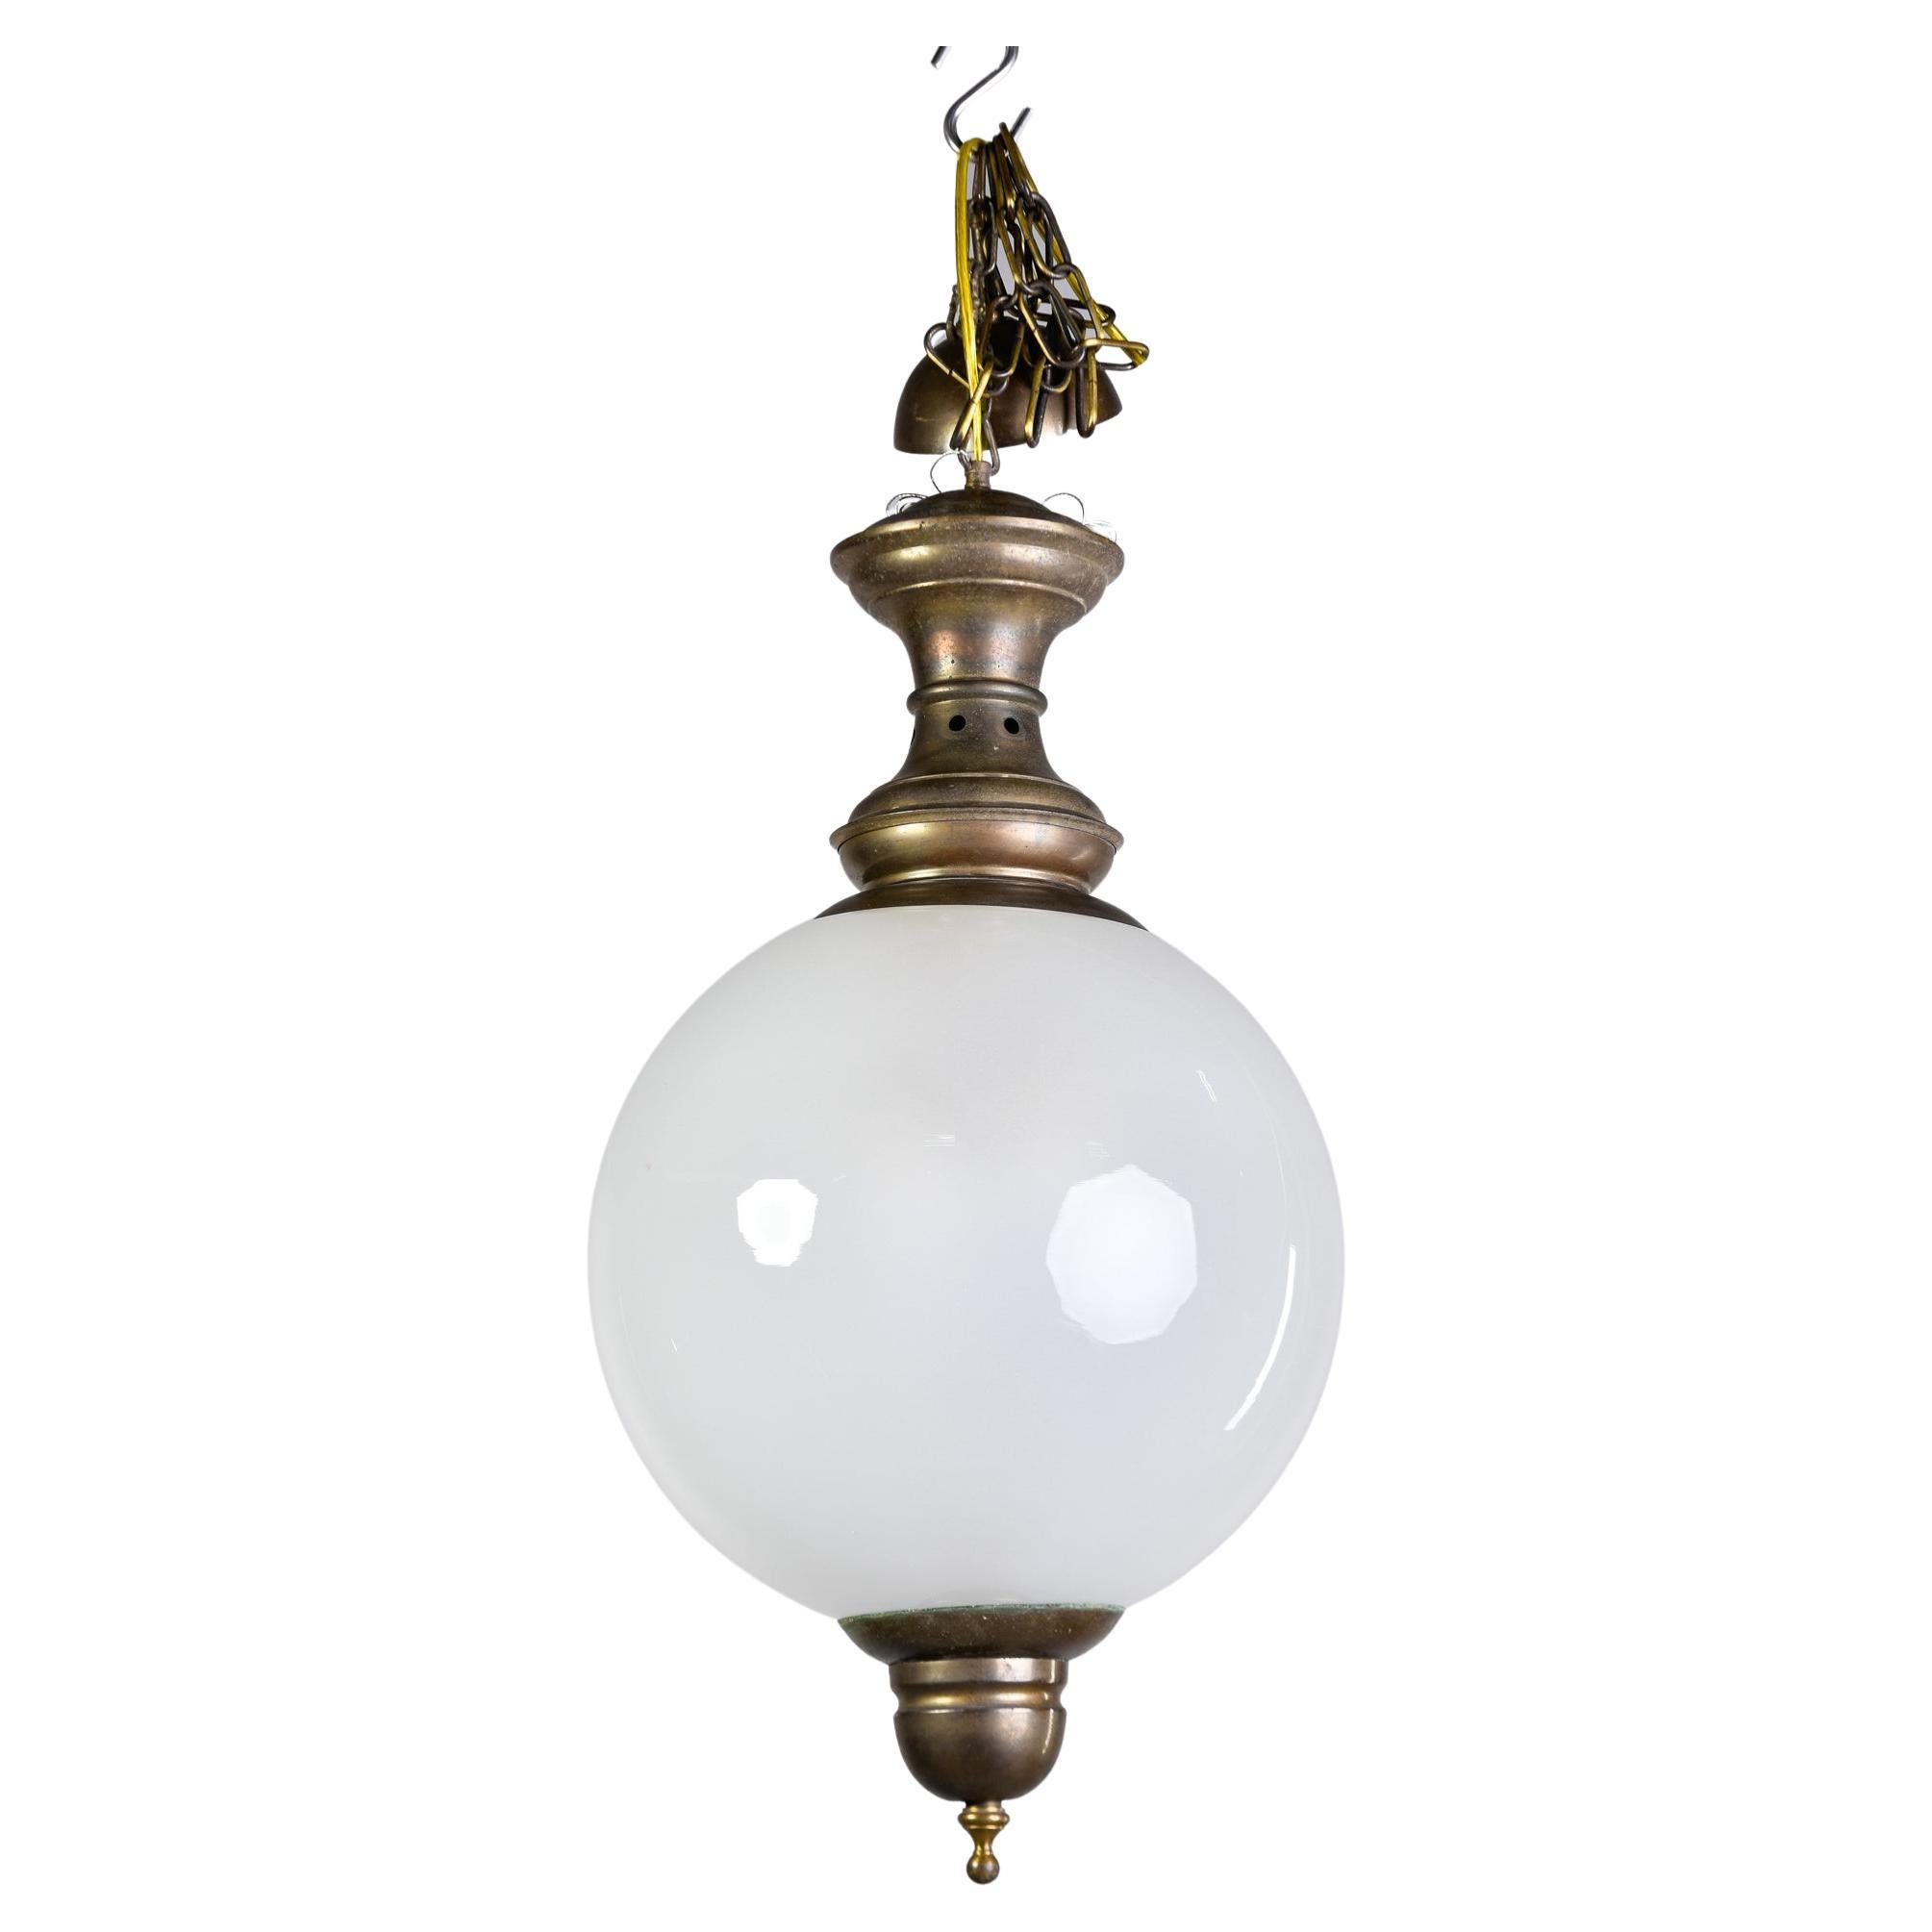 Midcentury White Glass Globe Fixture with Bronze Fitting